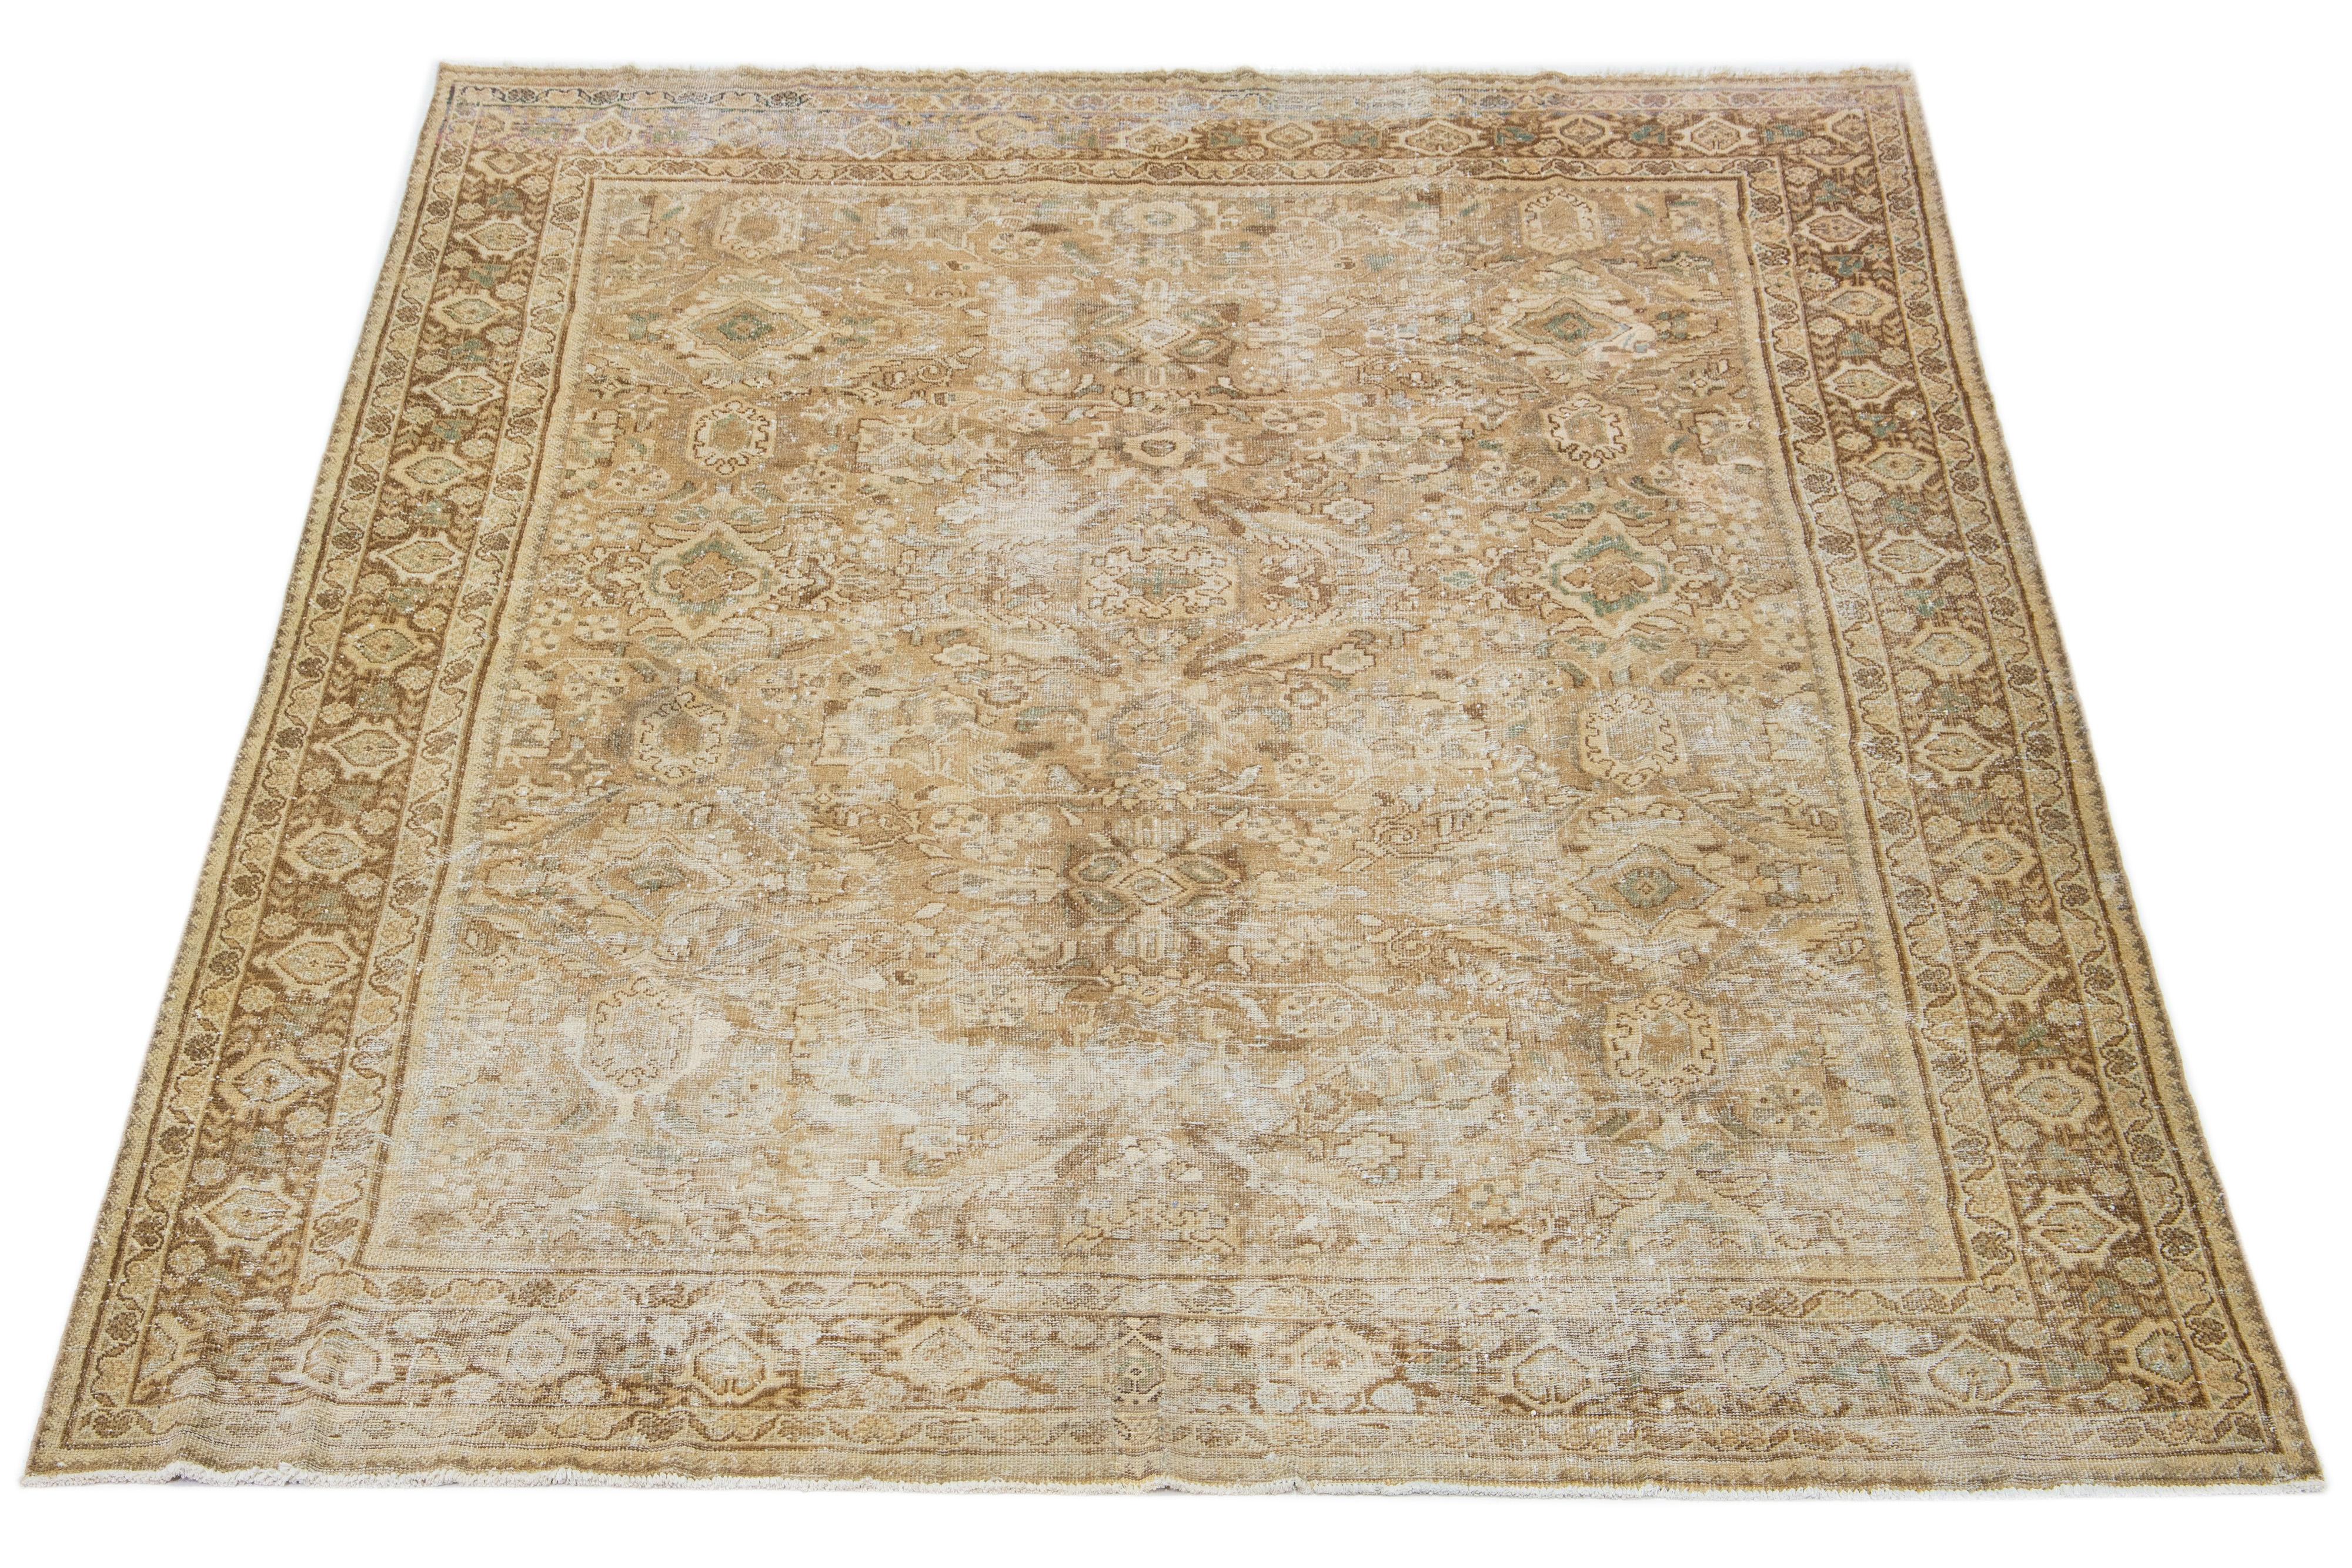 Beautiful Vintage Mahal hand-knotted wool rug with a beige color field. This Persian rug has green and brown hues throughout the floral motif.

This rug measures 9'7